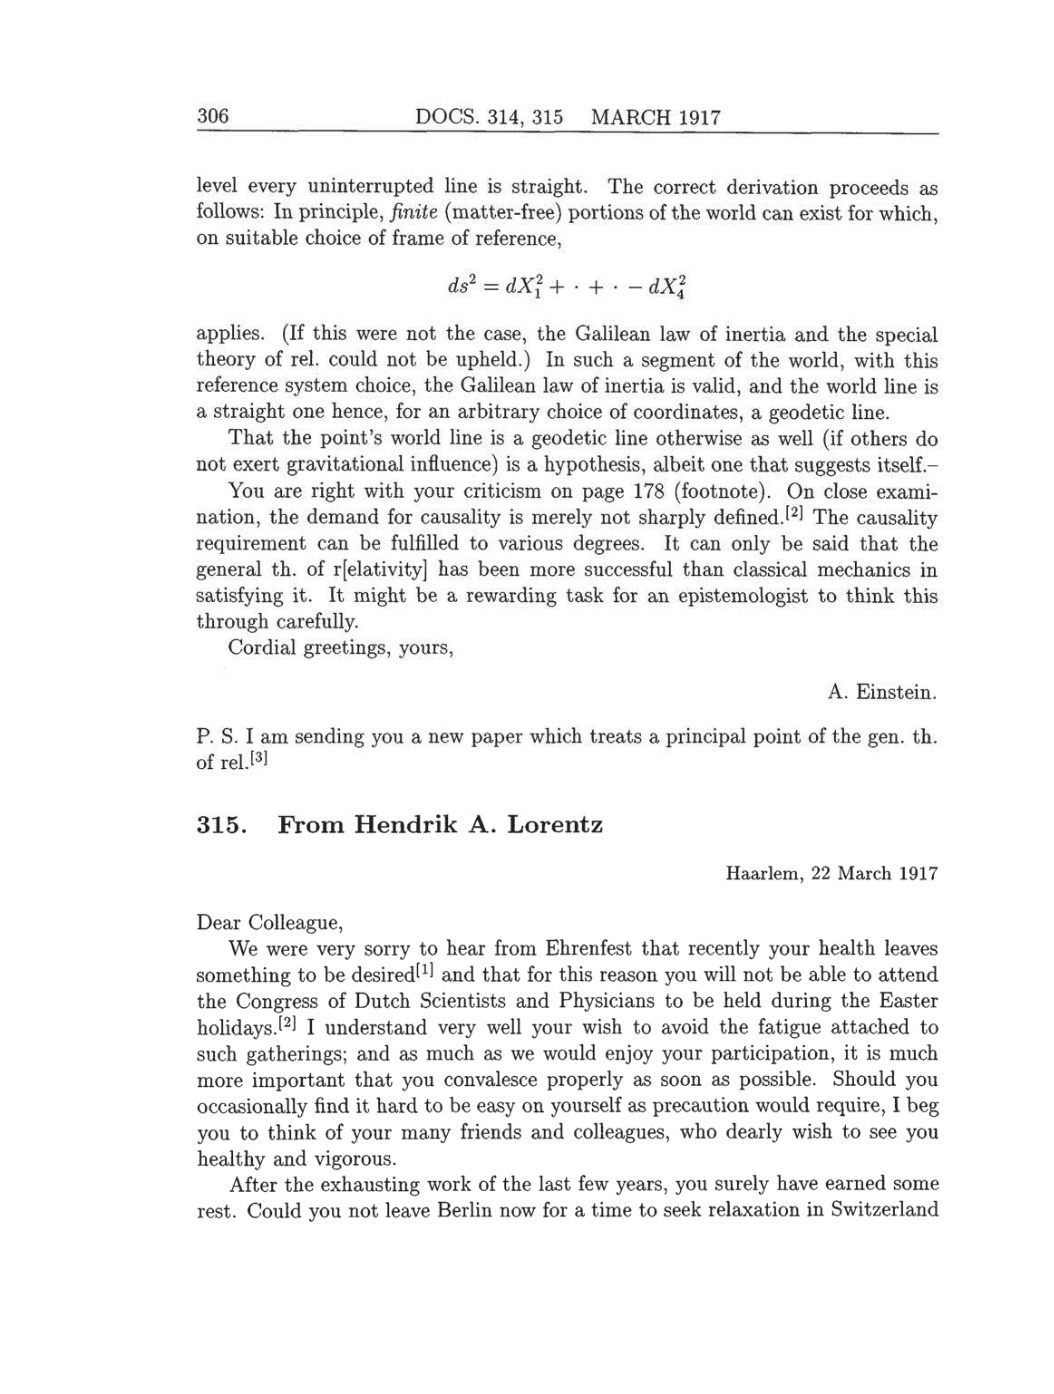 Volume 8: The Berlin Years: Correspondence, 1914-1918 (English translation supplement) page 306